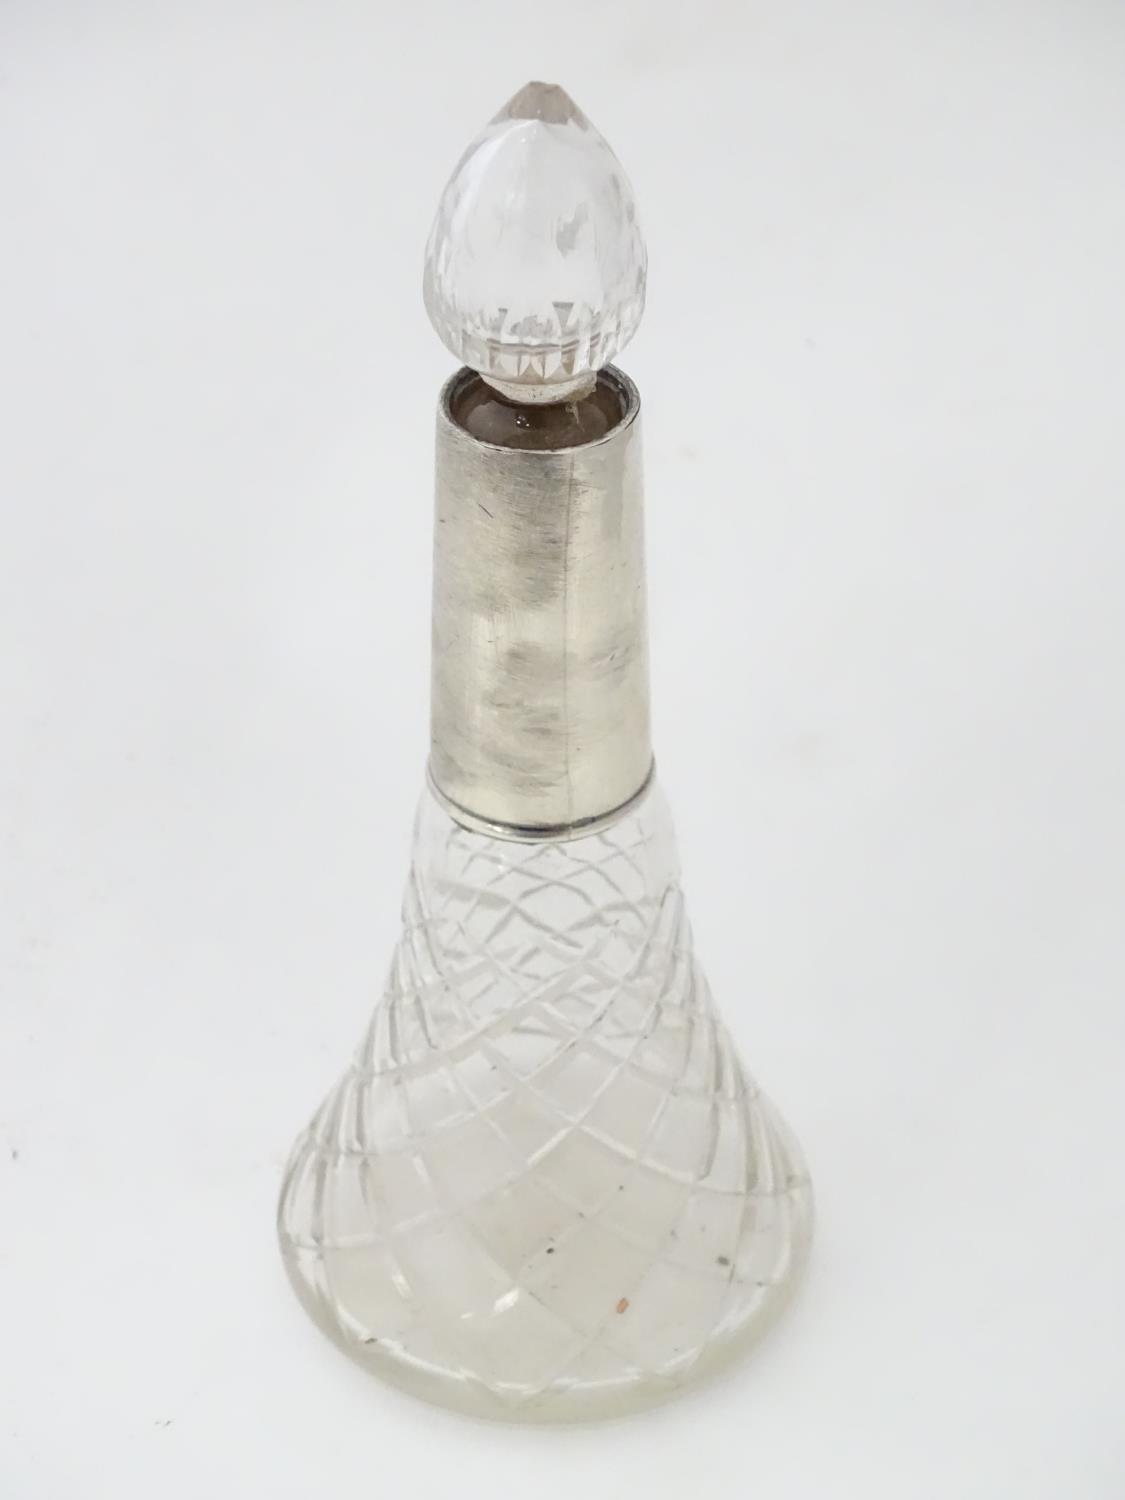 Victorian perfume / scent bottle Please Note - we do not make reference to the condition of lots - Image 3 of 5